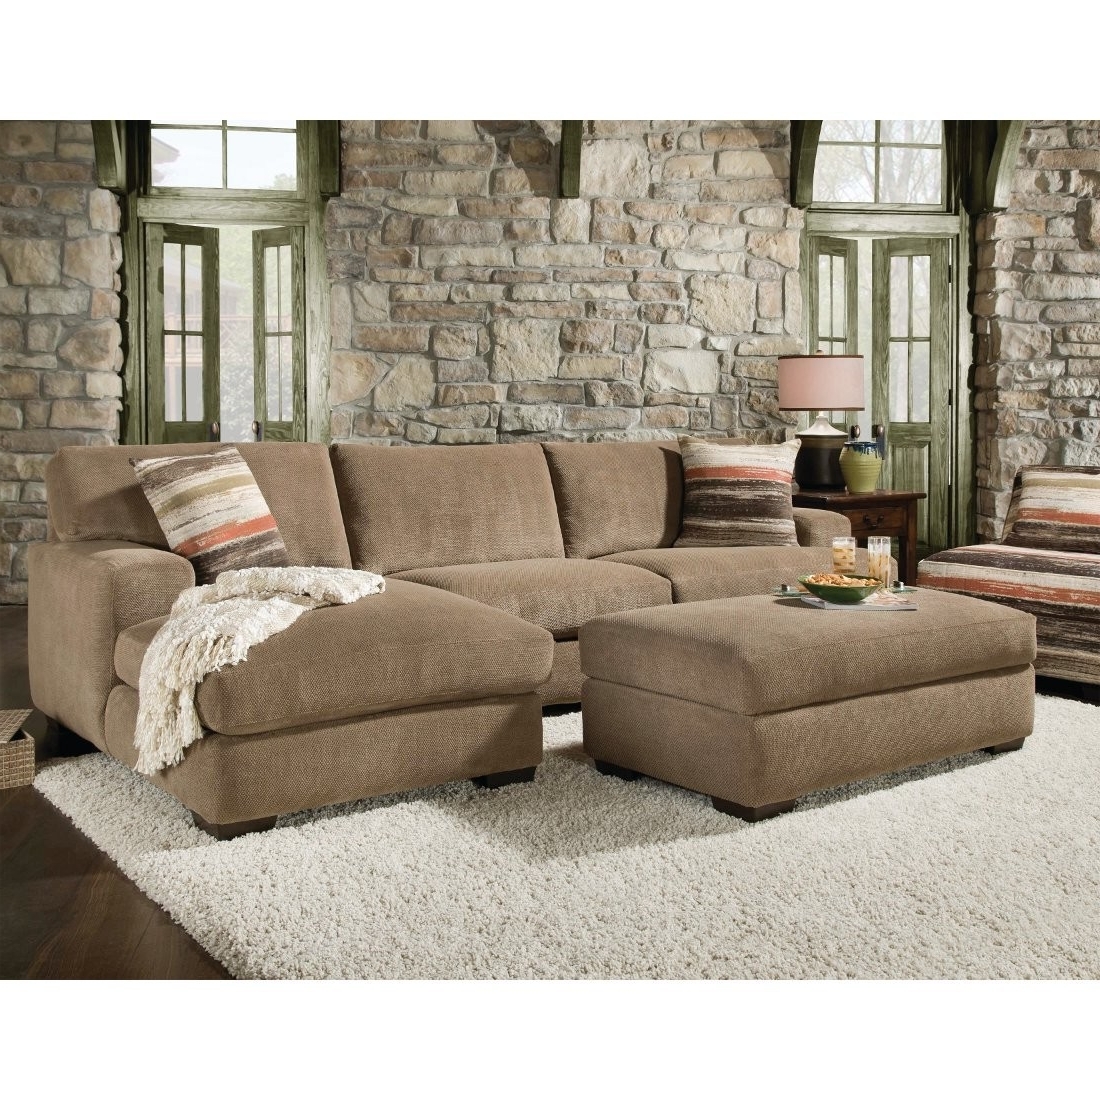 Sofas With Chaise And Ottoman